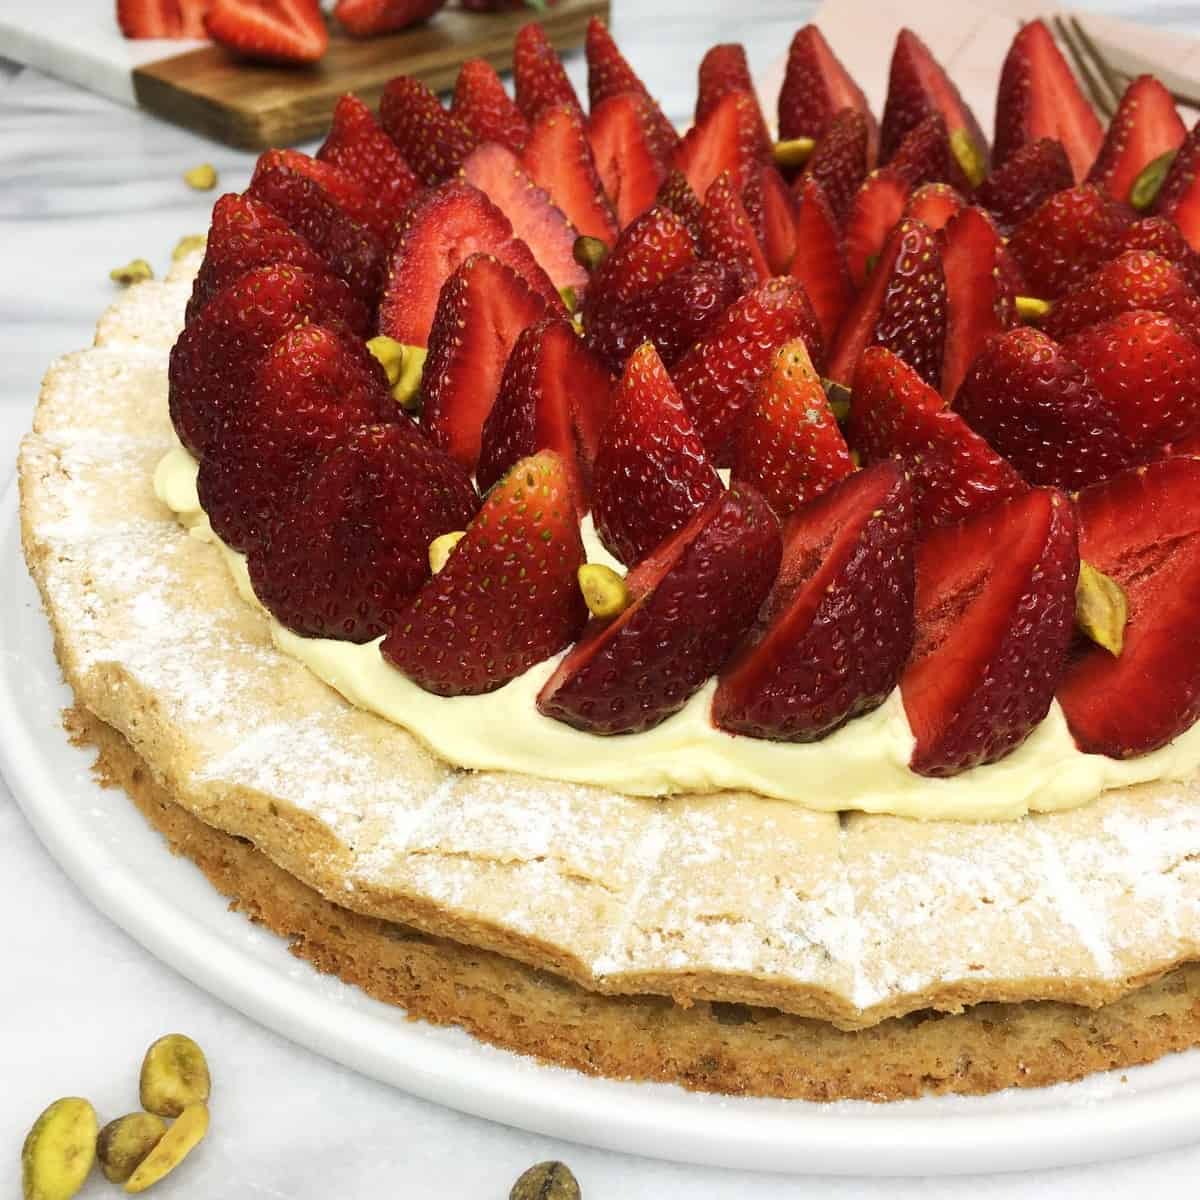 Pistachio dacquoise decorated with fresh strawberries on a white serving platter with berries and flatware on background.